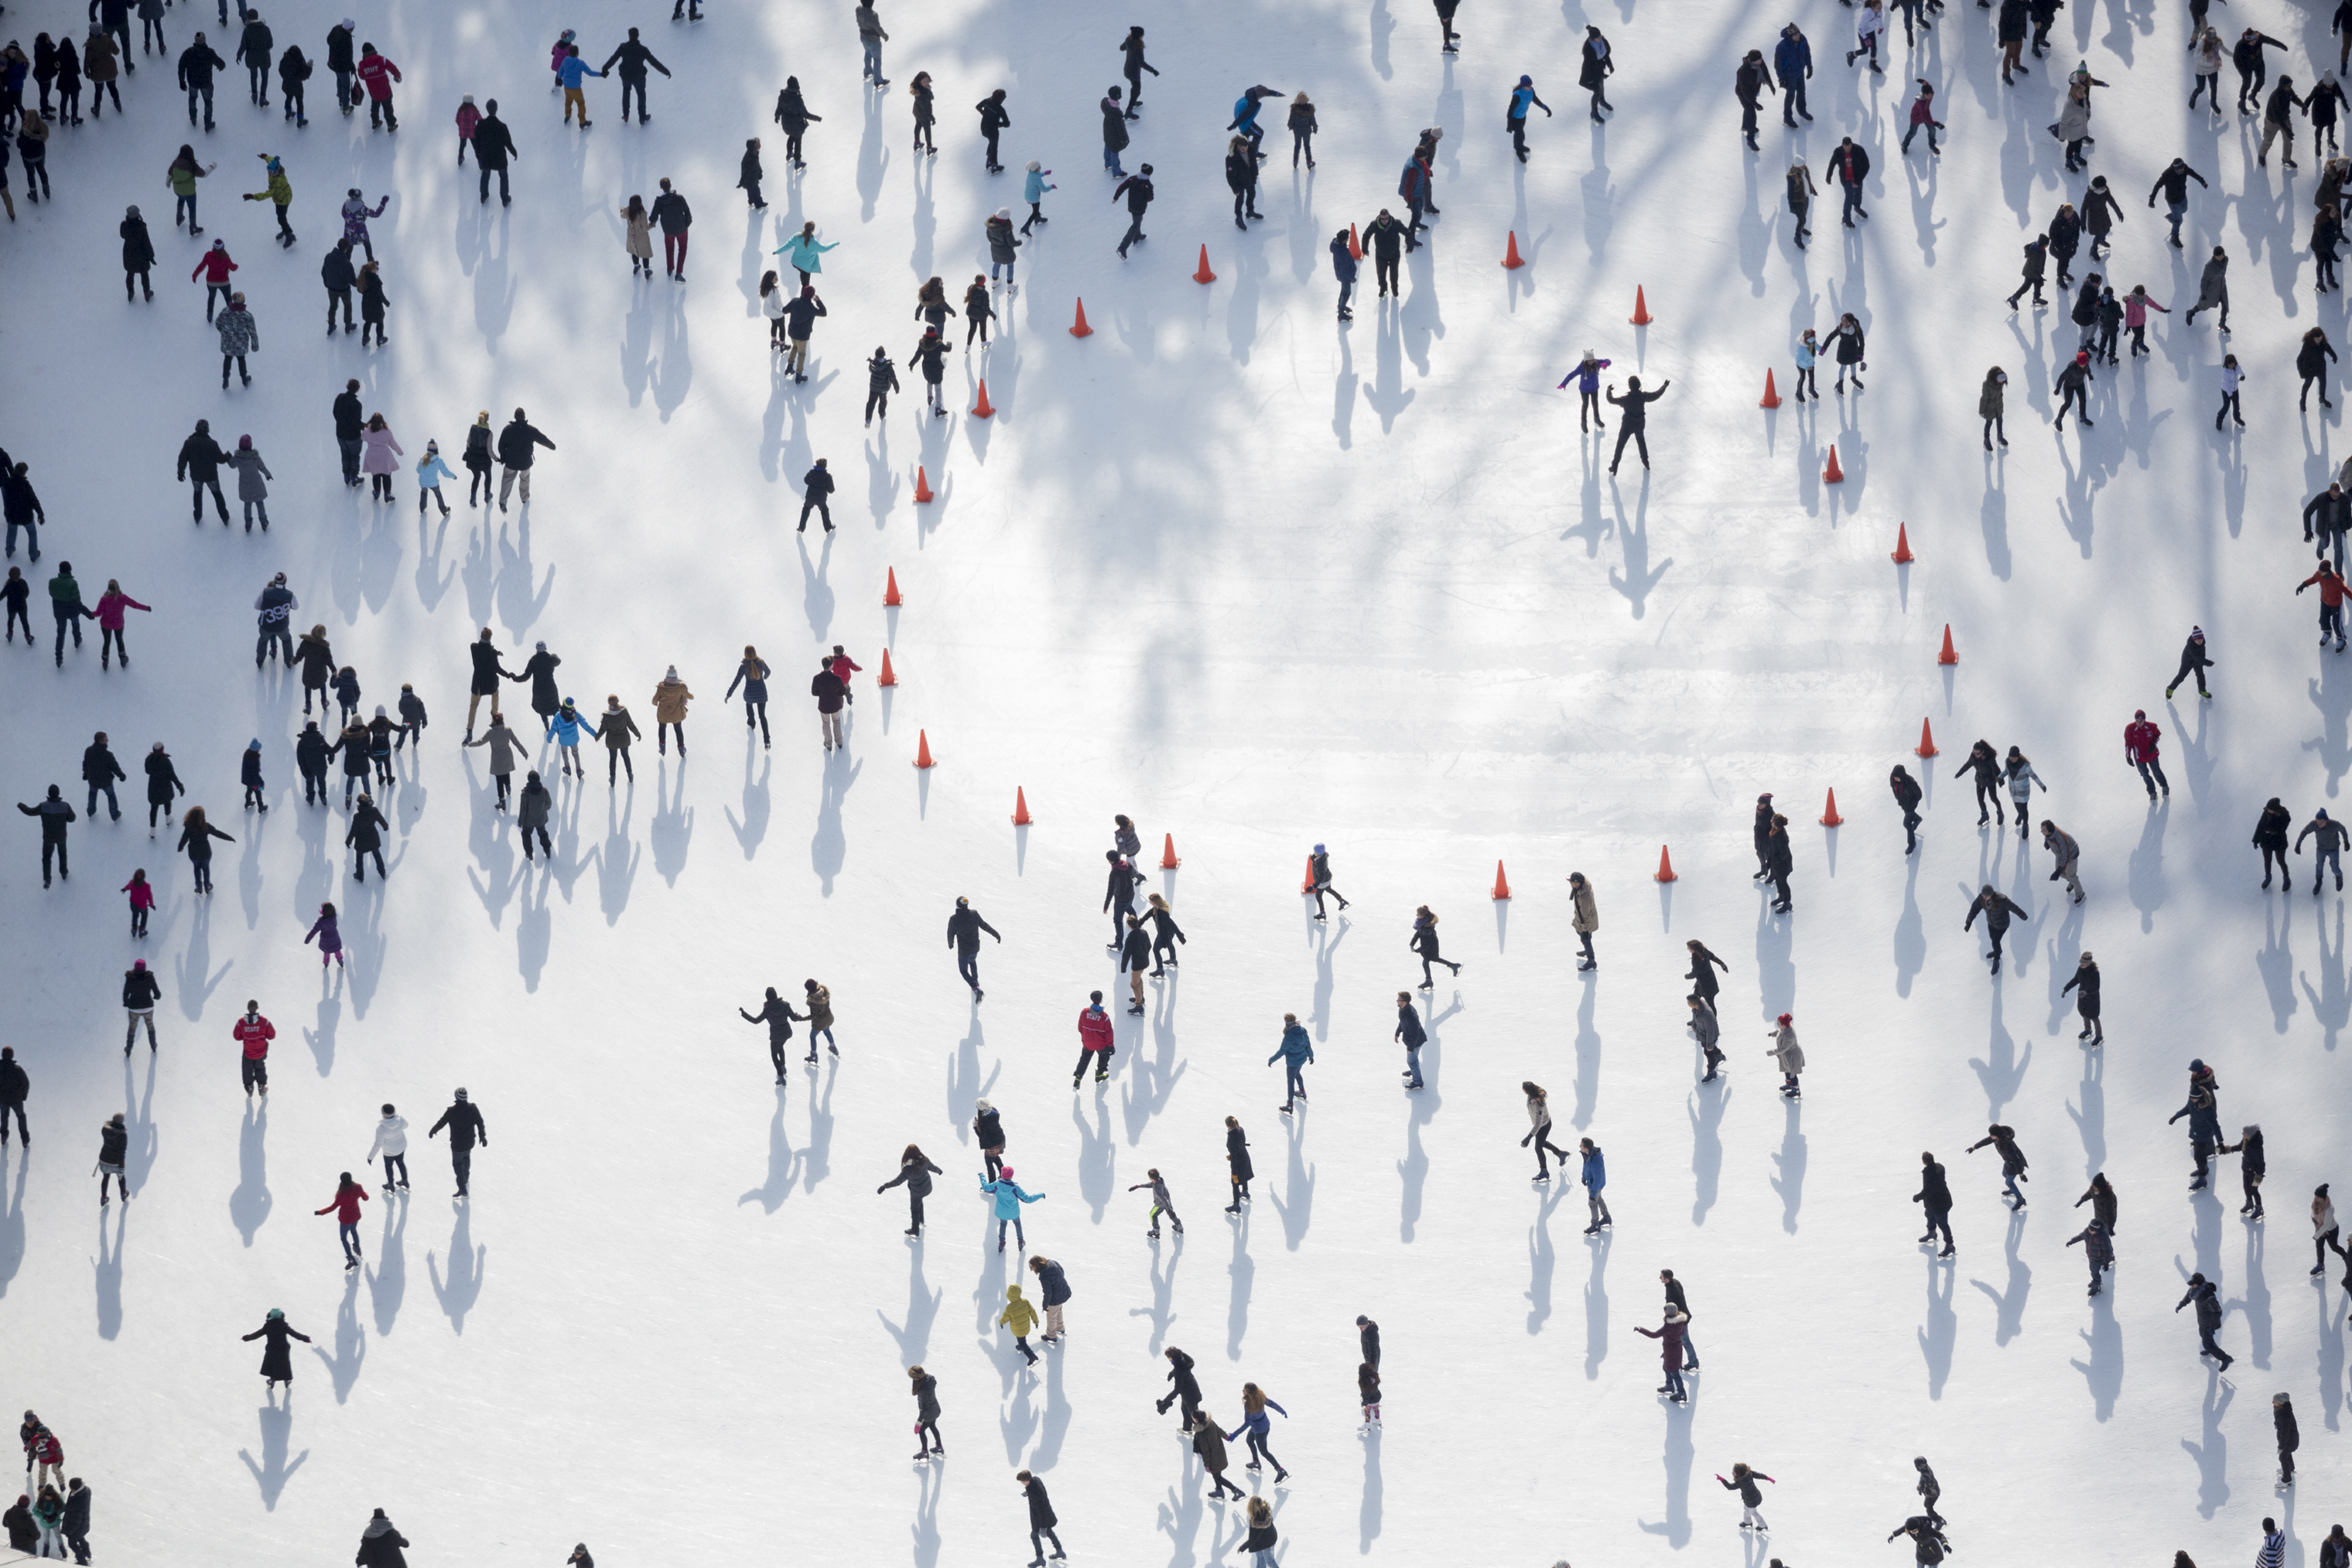 Ice skaters in Wollman Rink in Central Park. Photographed from a helicopter. (George Steinmetz)